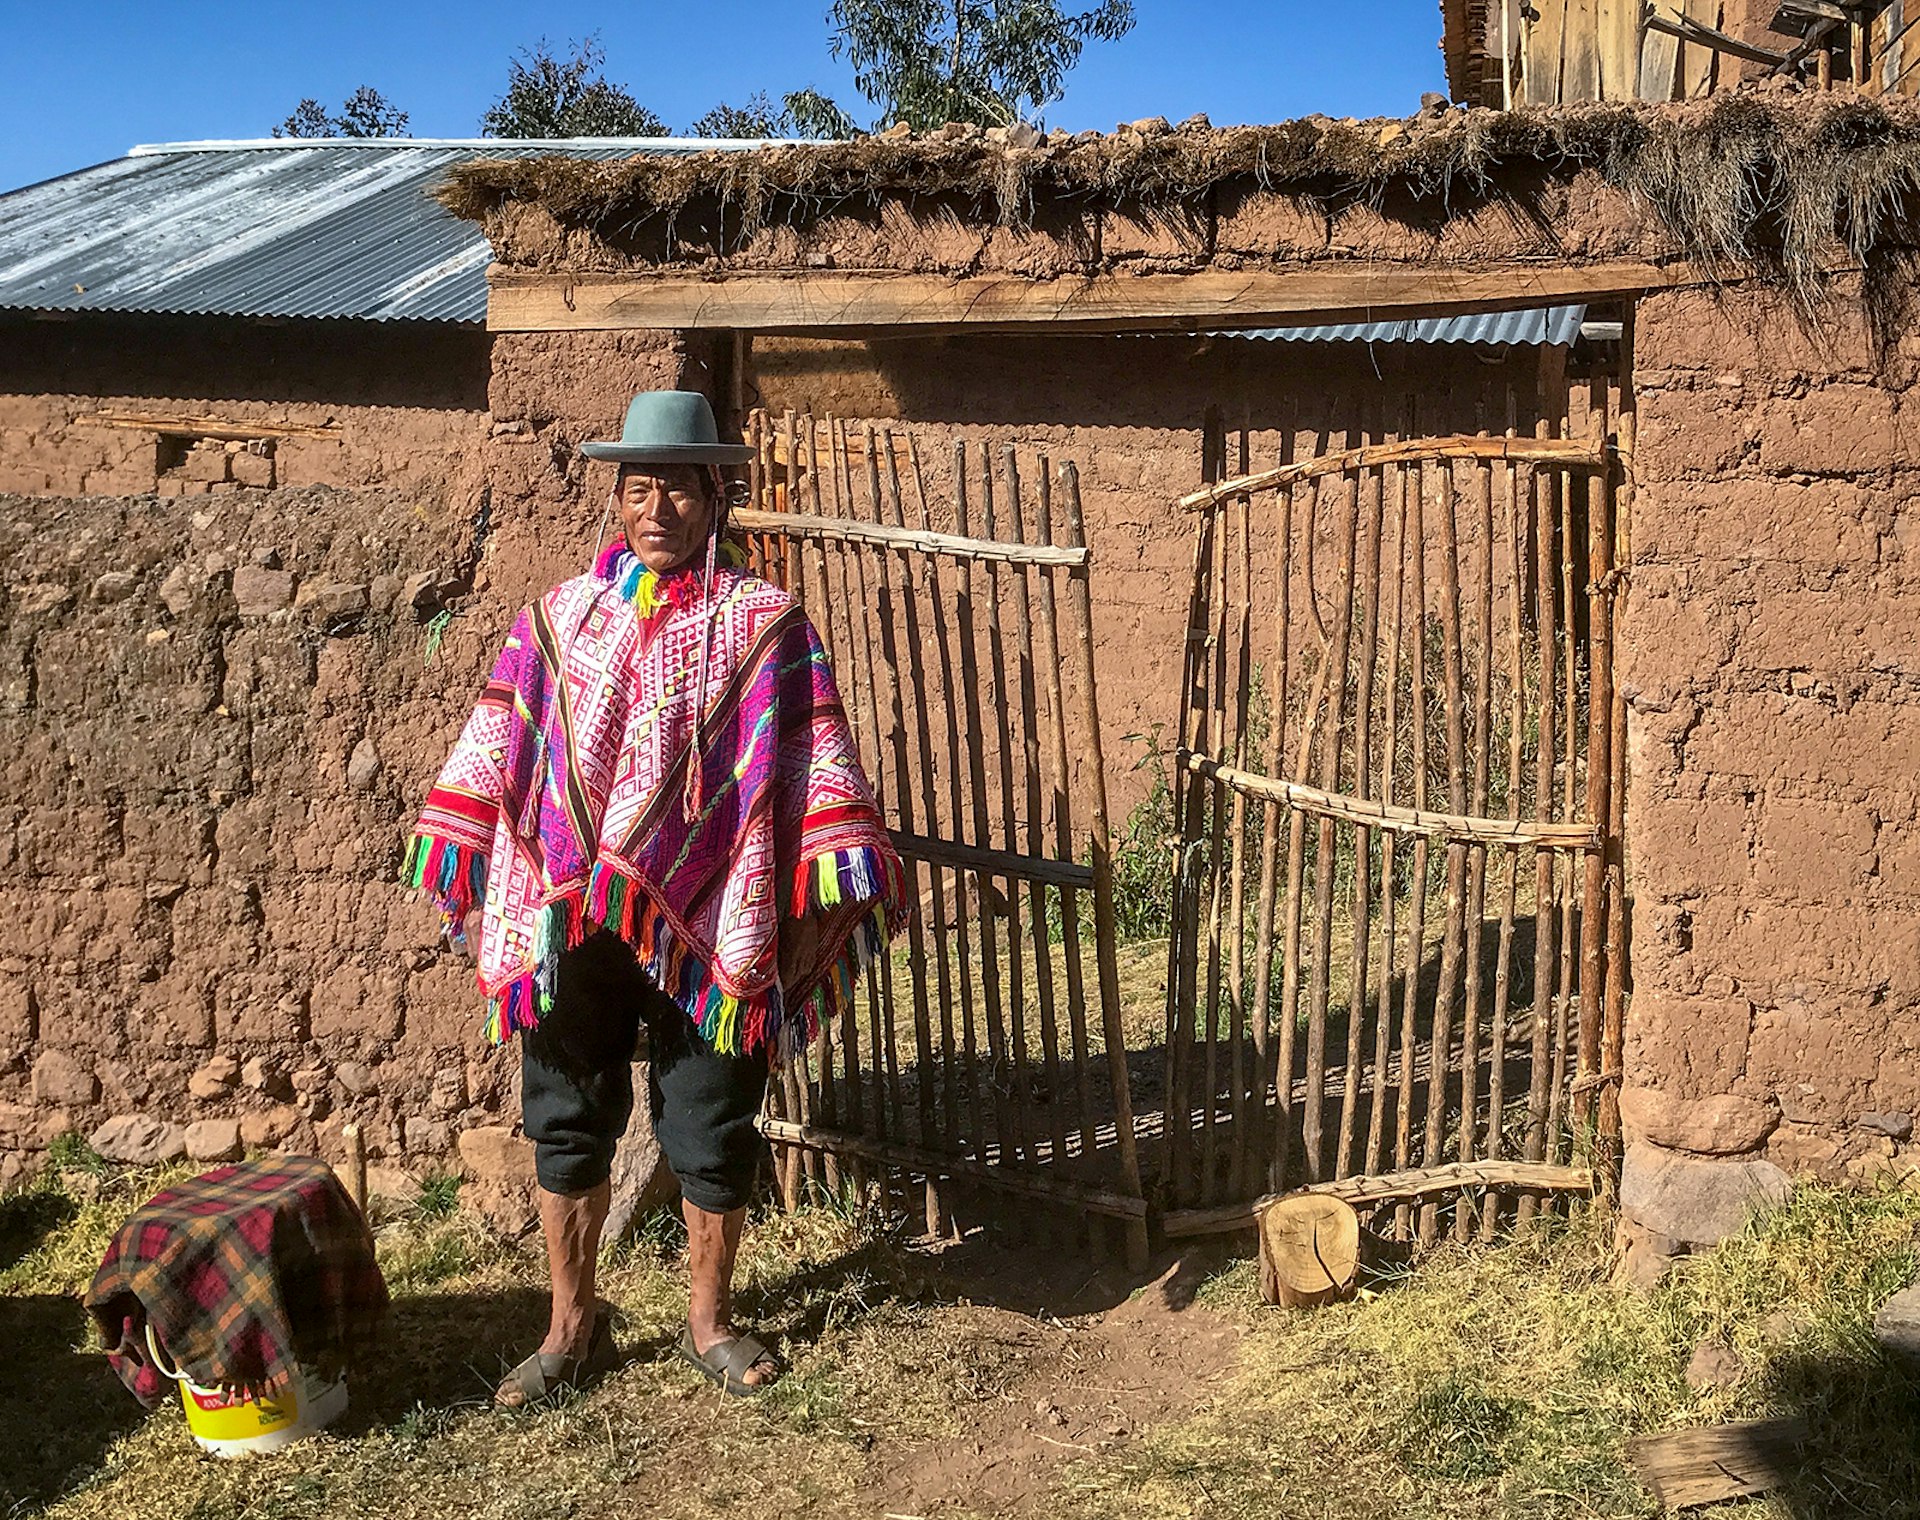 A man in a colorful traditional Andean poncho and hat poses in front of a wall and wooden gate